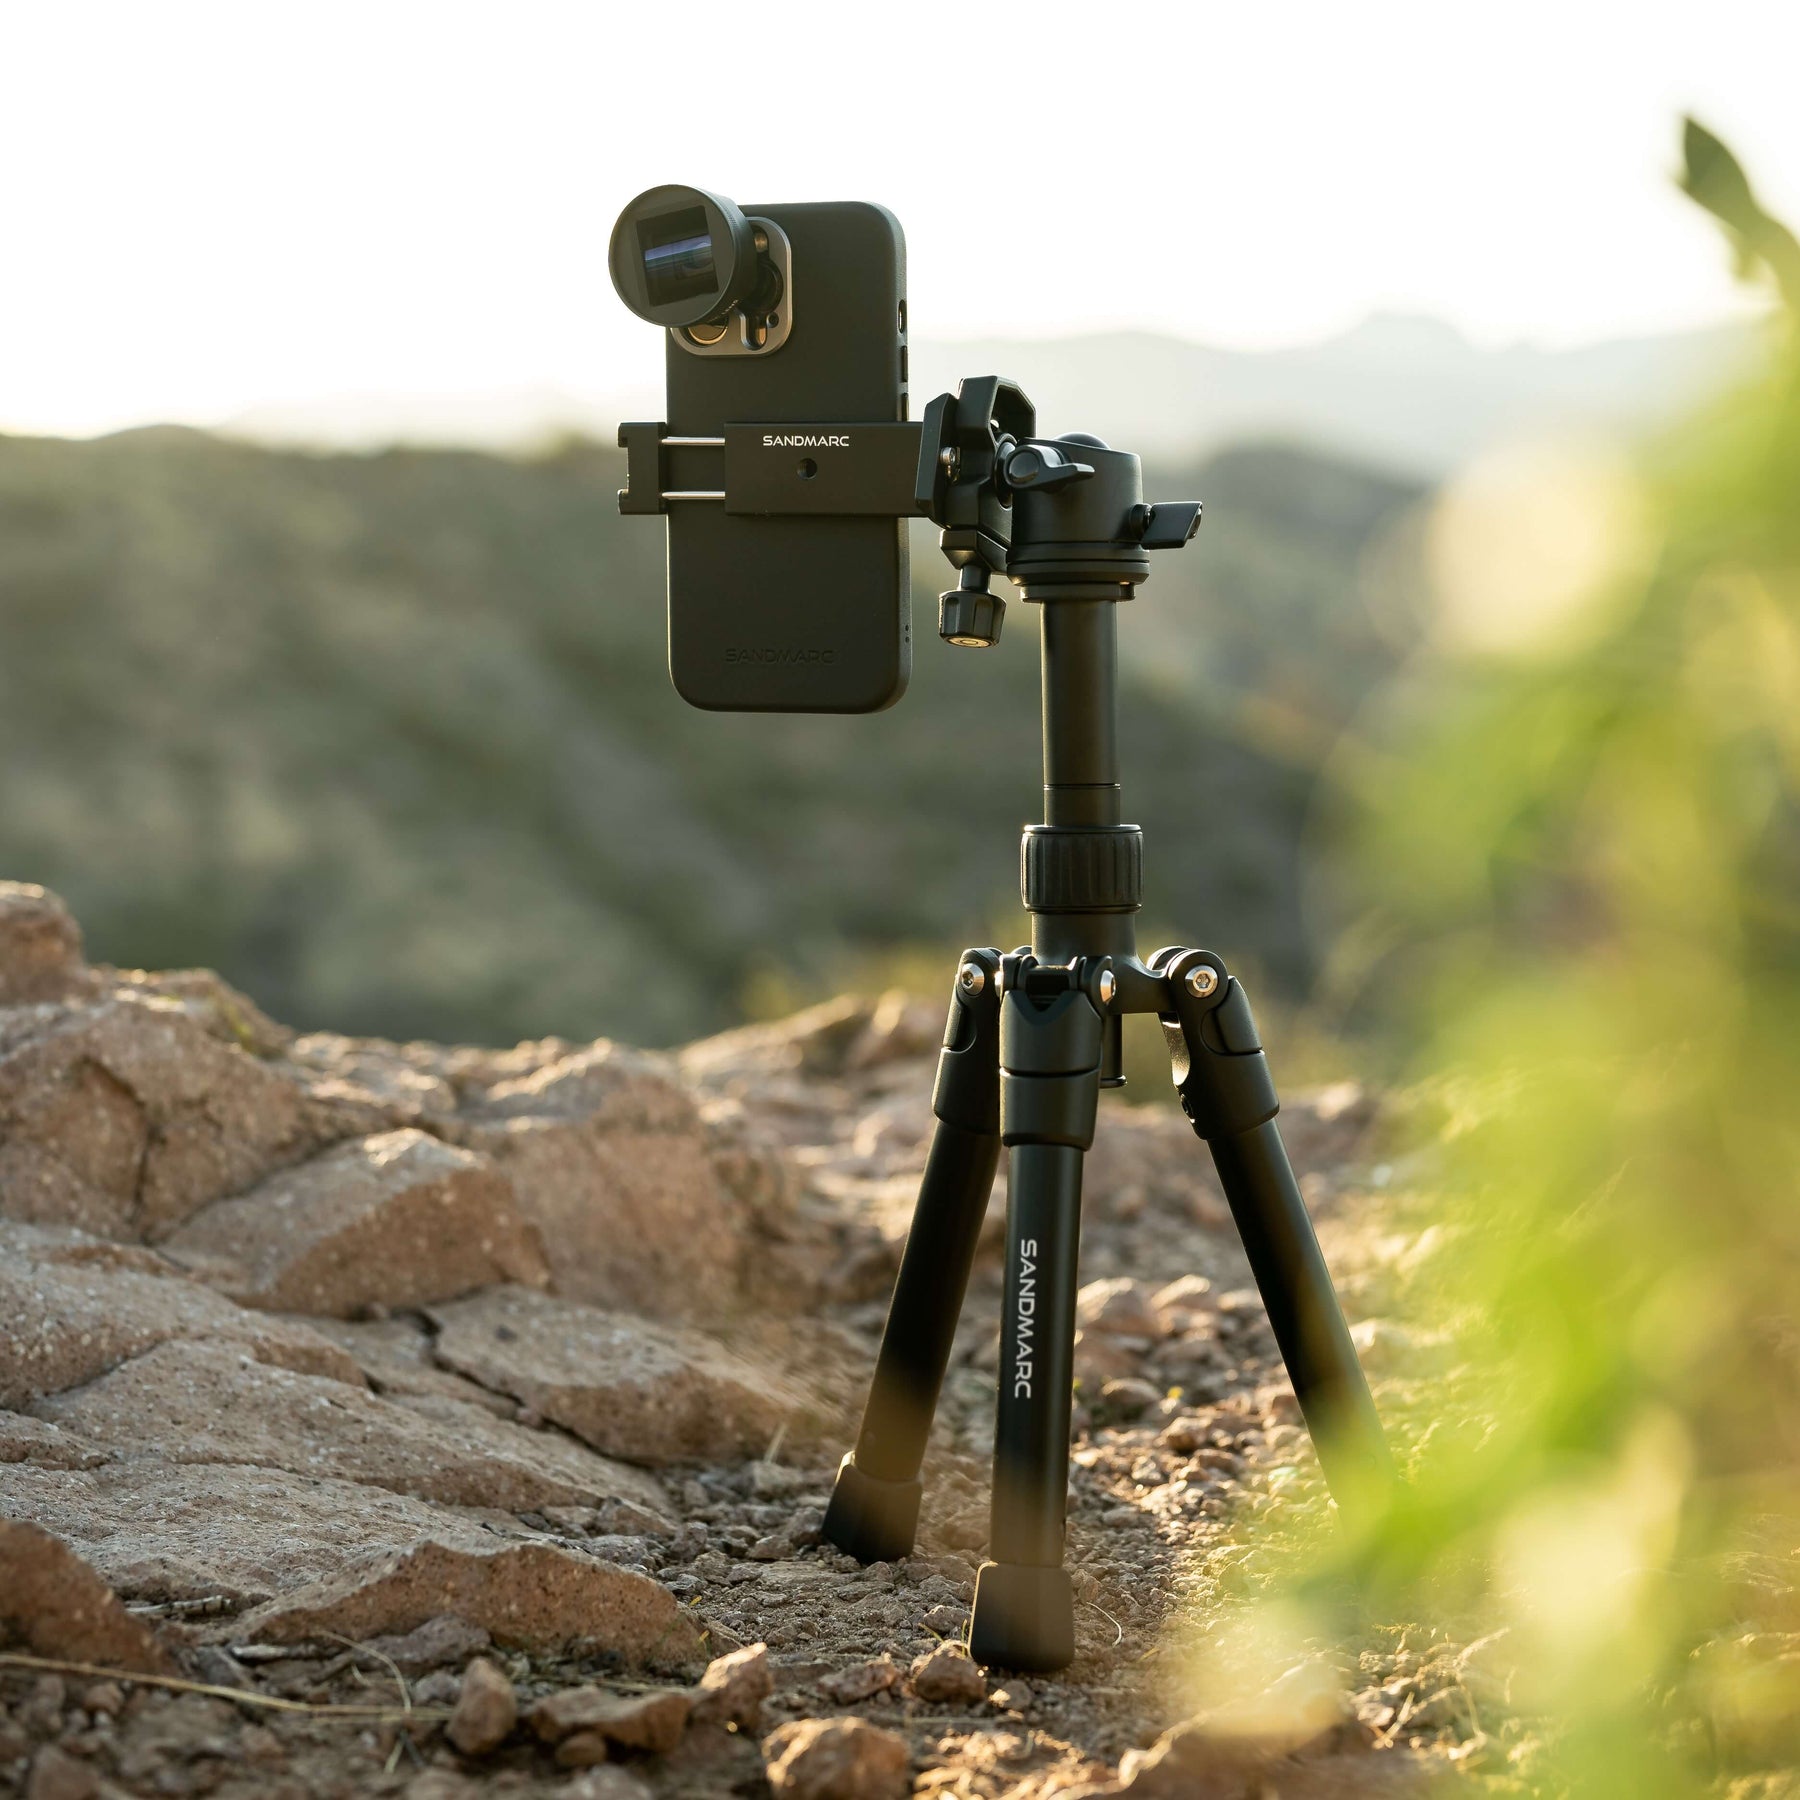 Sandmarc's New Carbon Fiber Tripod is Made Specifically for iPhone Shooters